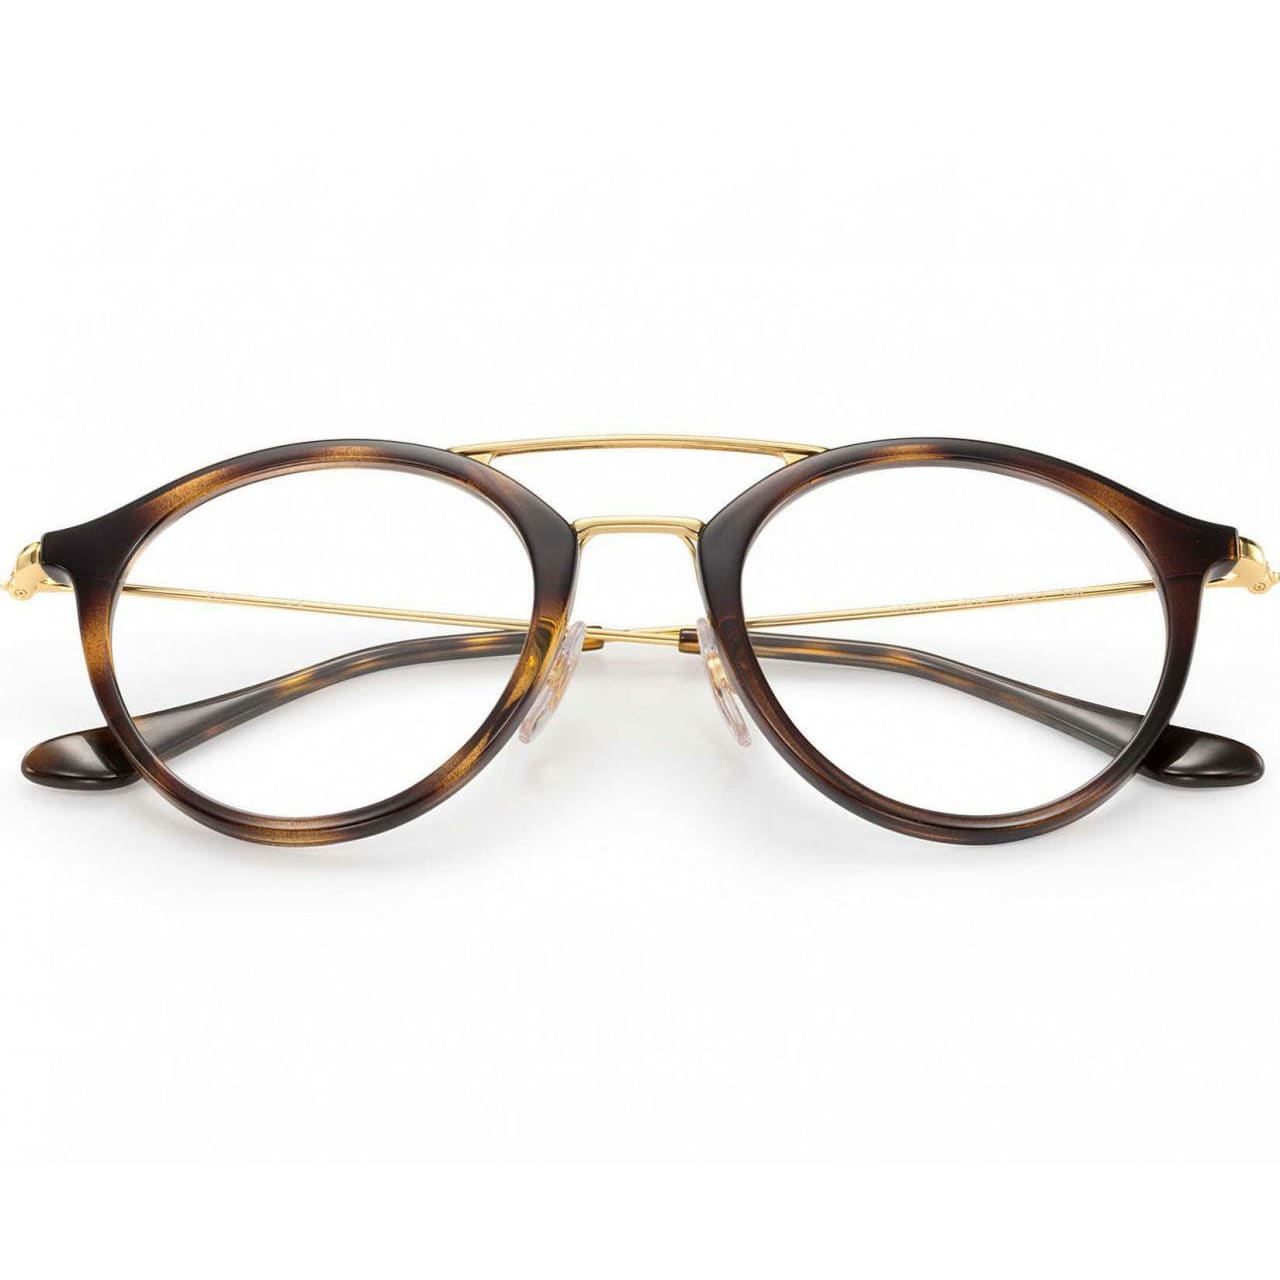 Ray-Ban RB7097 2012 Tortoise with Gold Full Rim Round Injected Eyeglasses Frames 8053672603644